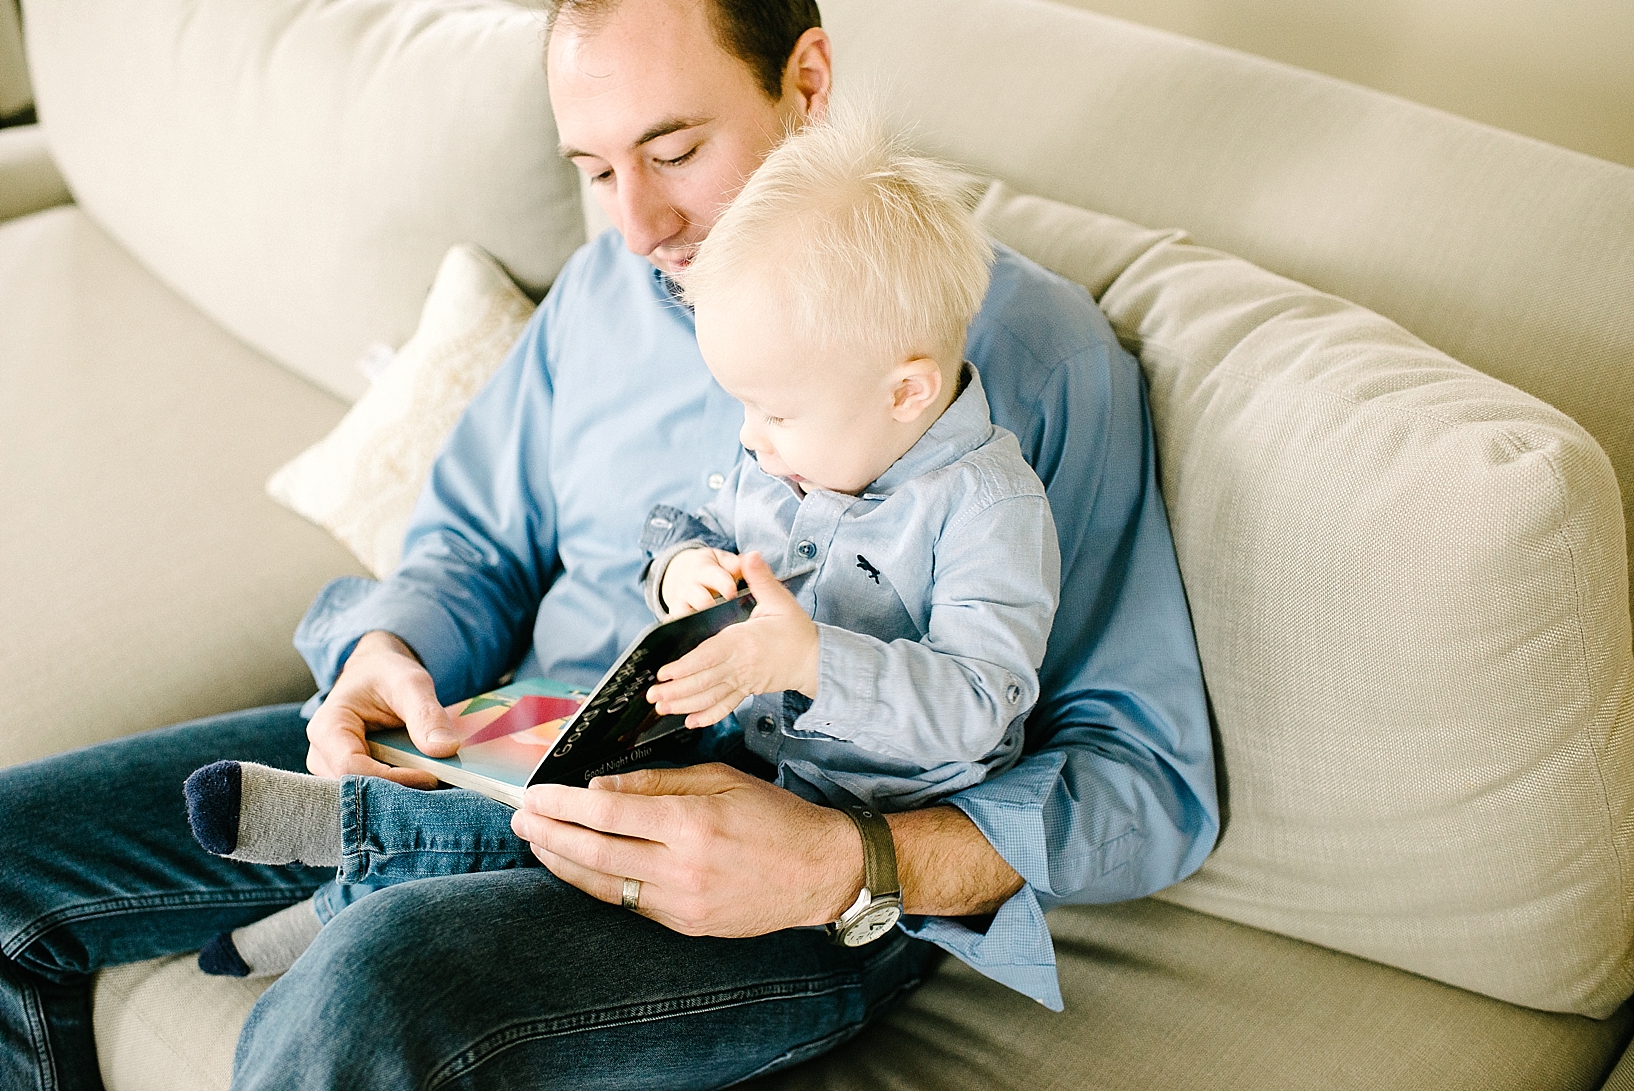 dad sitting on couch reading books with toddler son on his lap